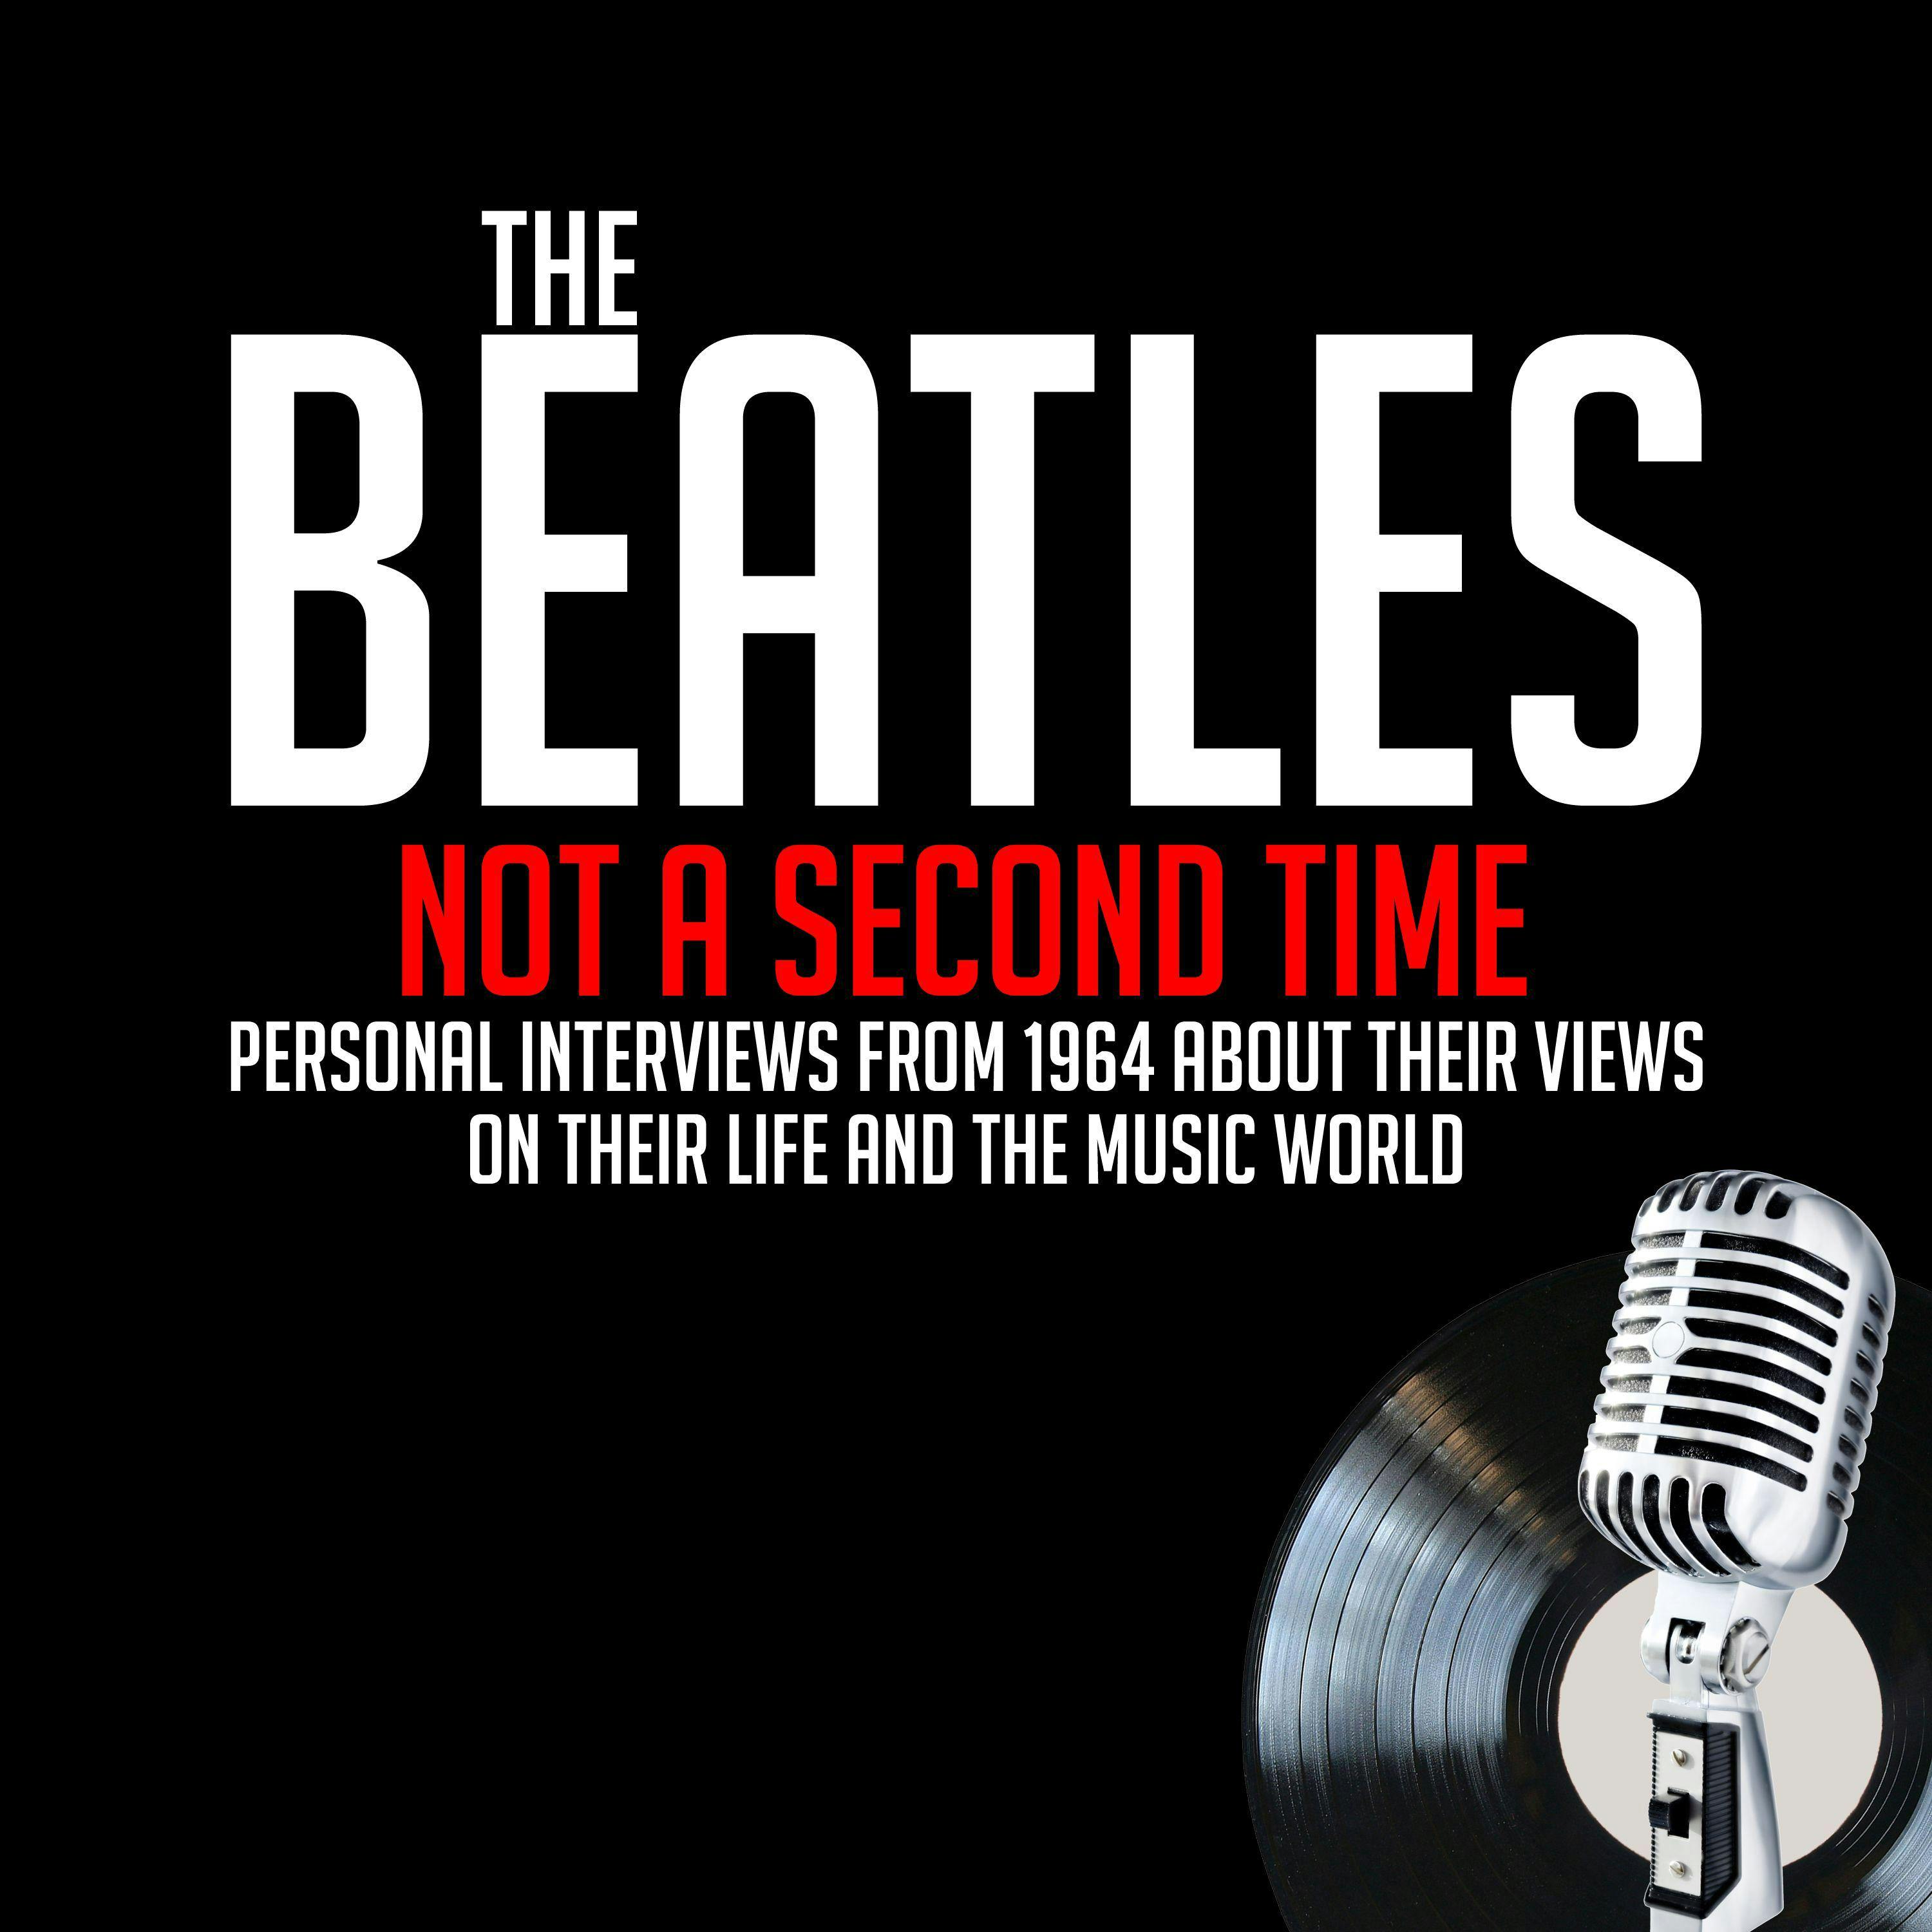 Not A Second Time: Personal Interviews from 1964 About Their Views on Their Life and the Music World - George Harrison, John Lennon, Derek Taylor, Ringo Starr, Paul McCartney